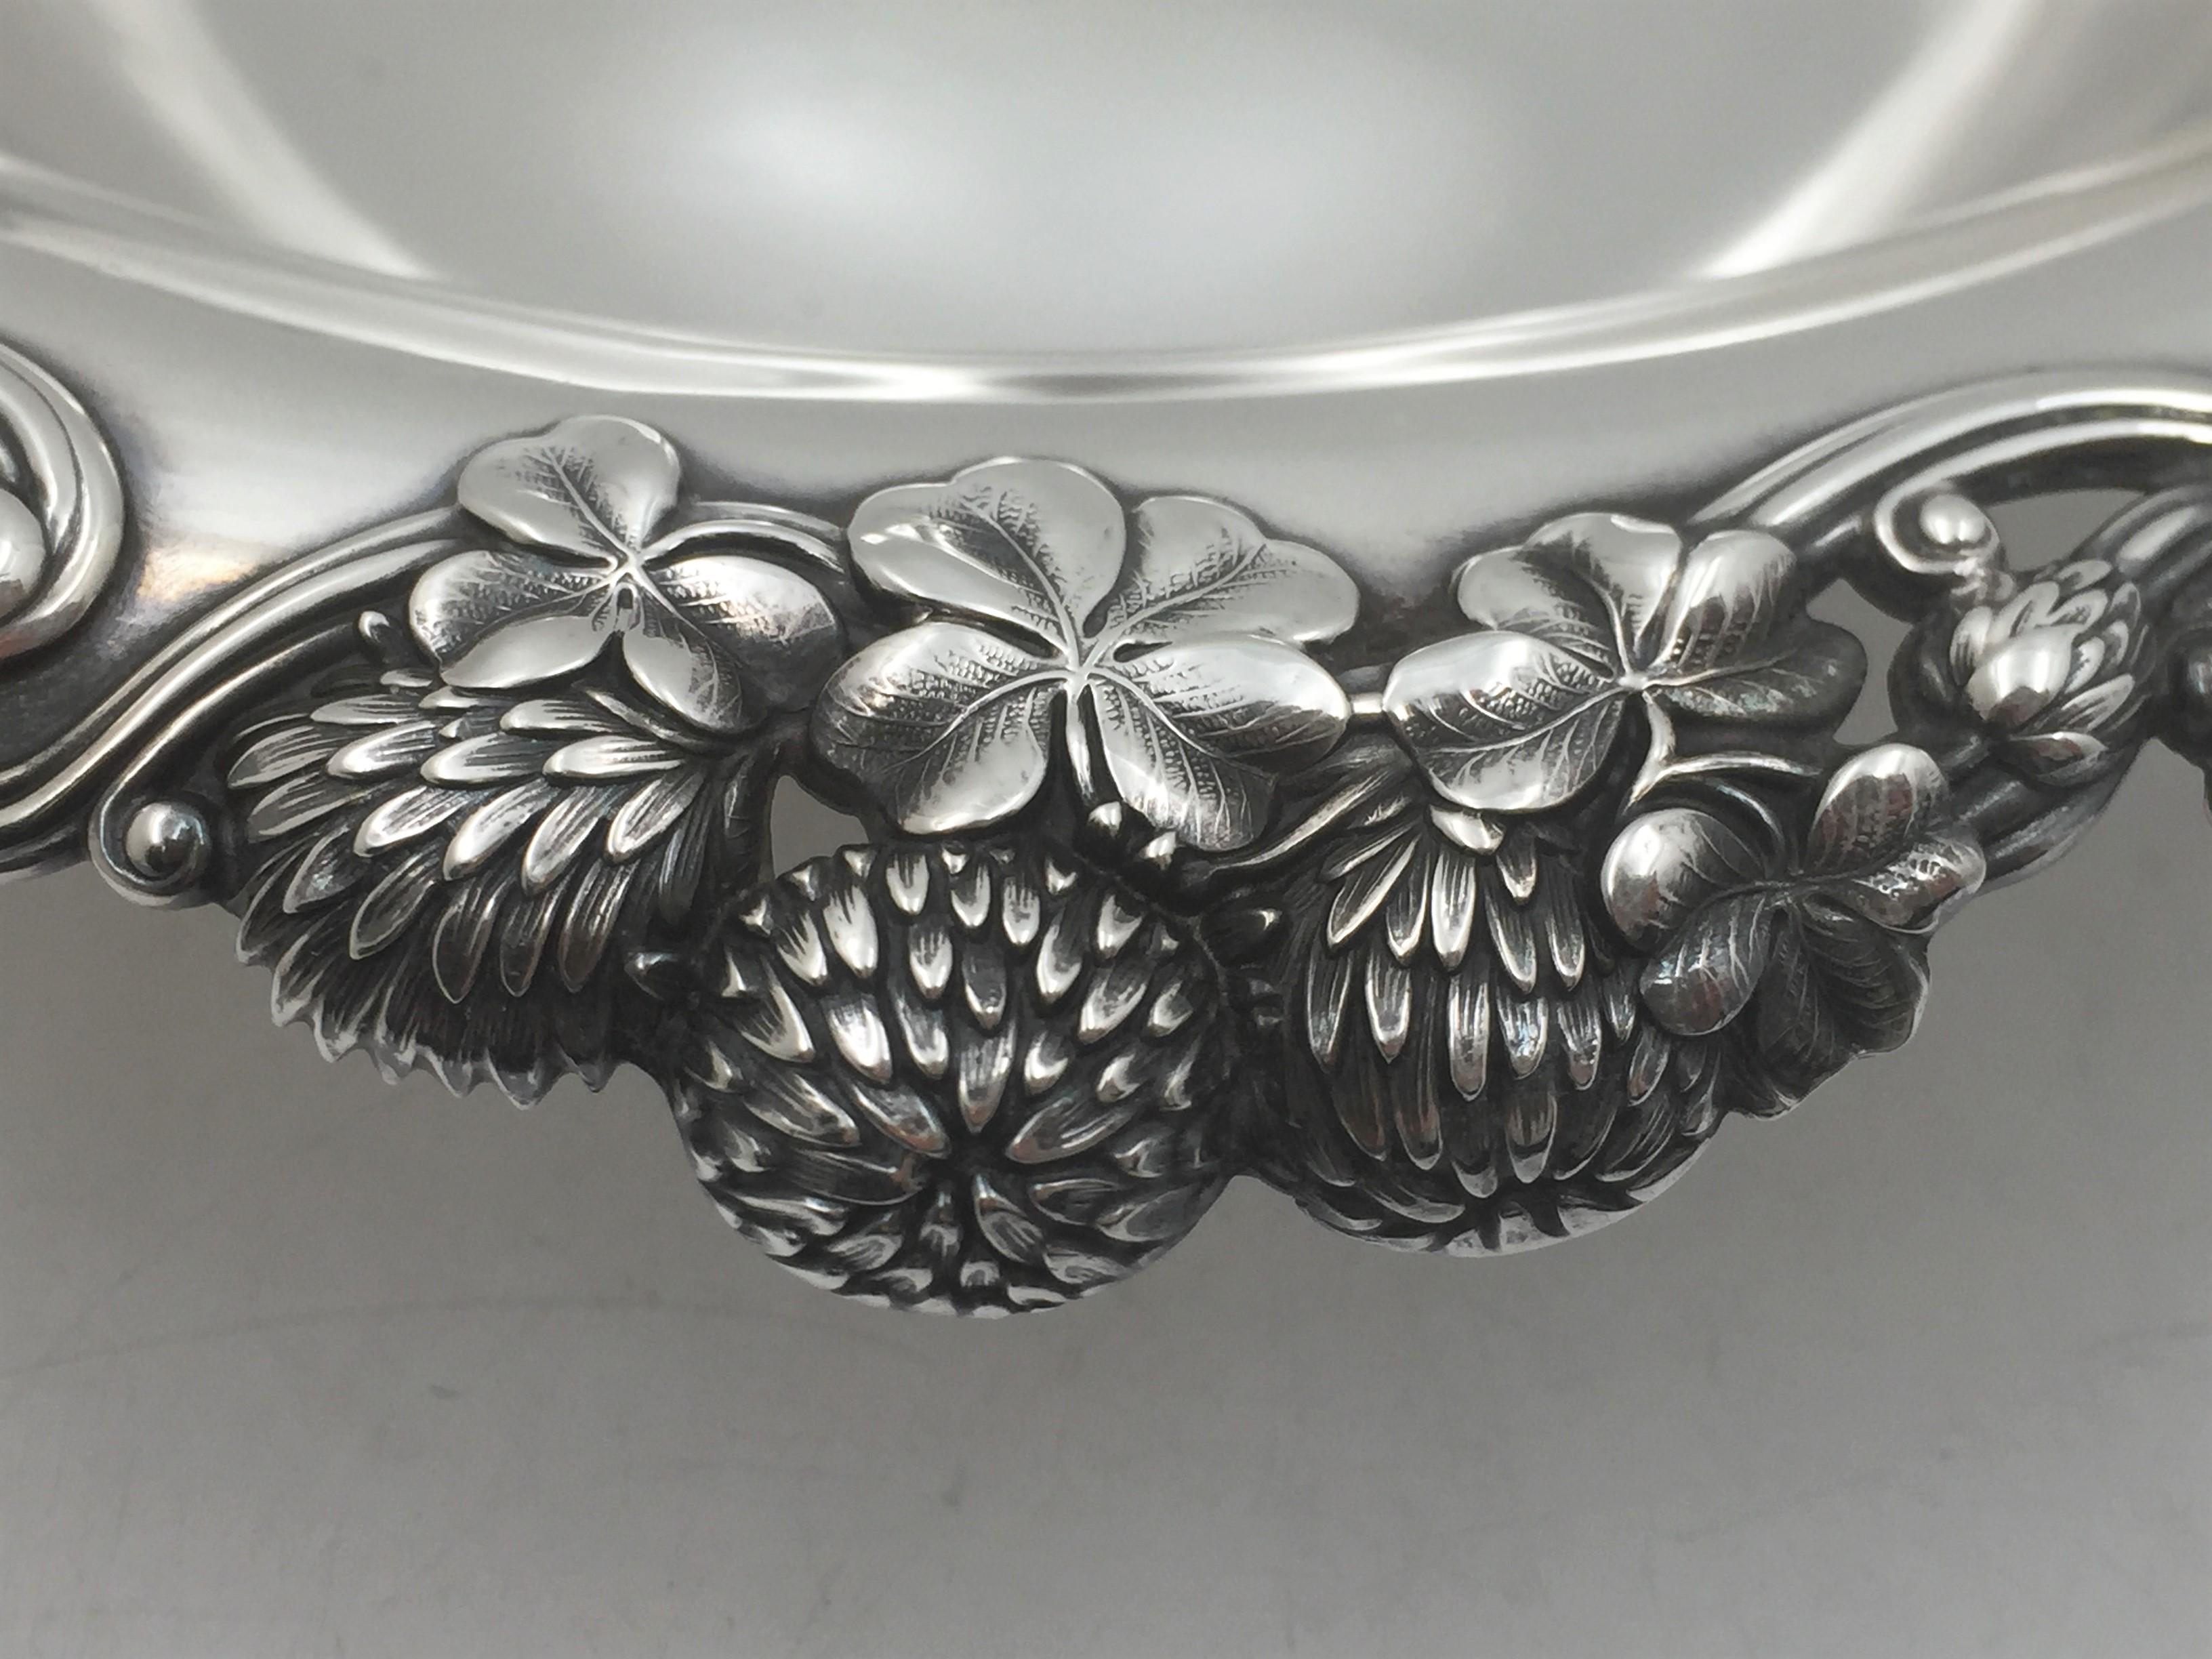 Late 19th Century Tiffany & Co. 1898 Sterling Silver Large Clover Centerpiece Bowl Art Nouveau For Sale